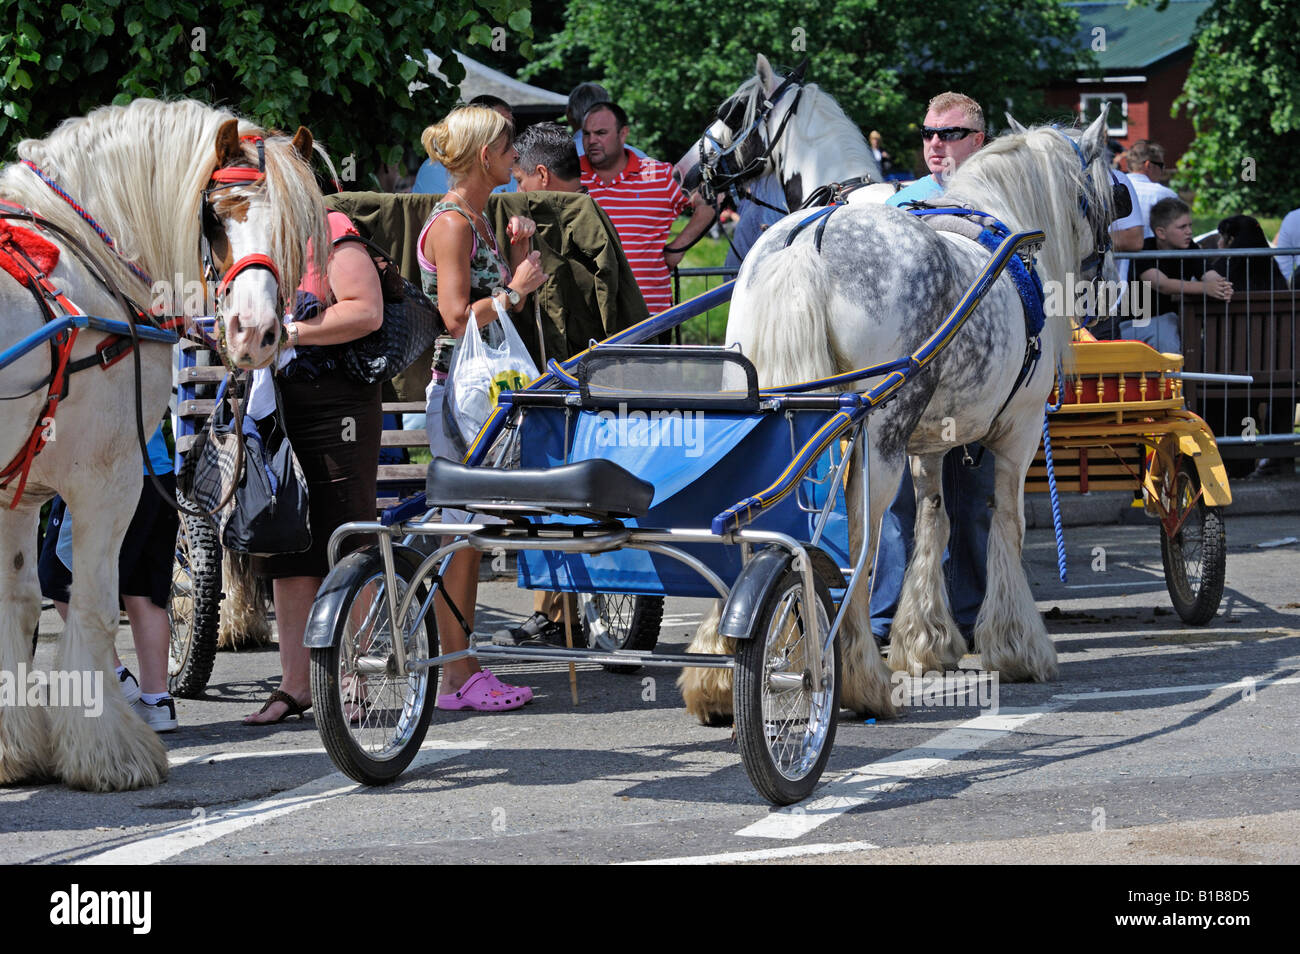 Gypsy travellers and spectators at Appleby Horse Fair. Appleby-in-Westmorland, Cumbria, England, United Kingdom, Europe. Stock Photo